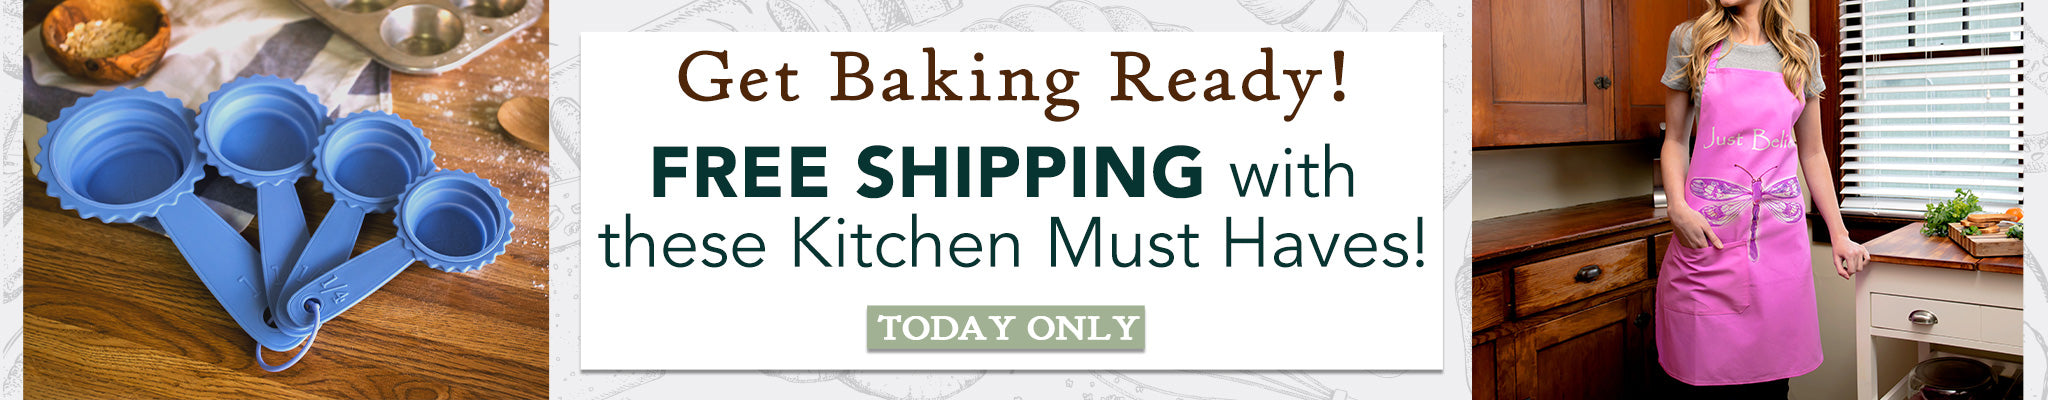 Free Shipping with these Baking Must Haves! | Today Only!